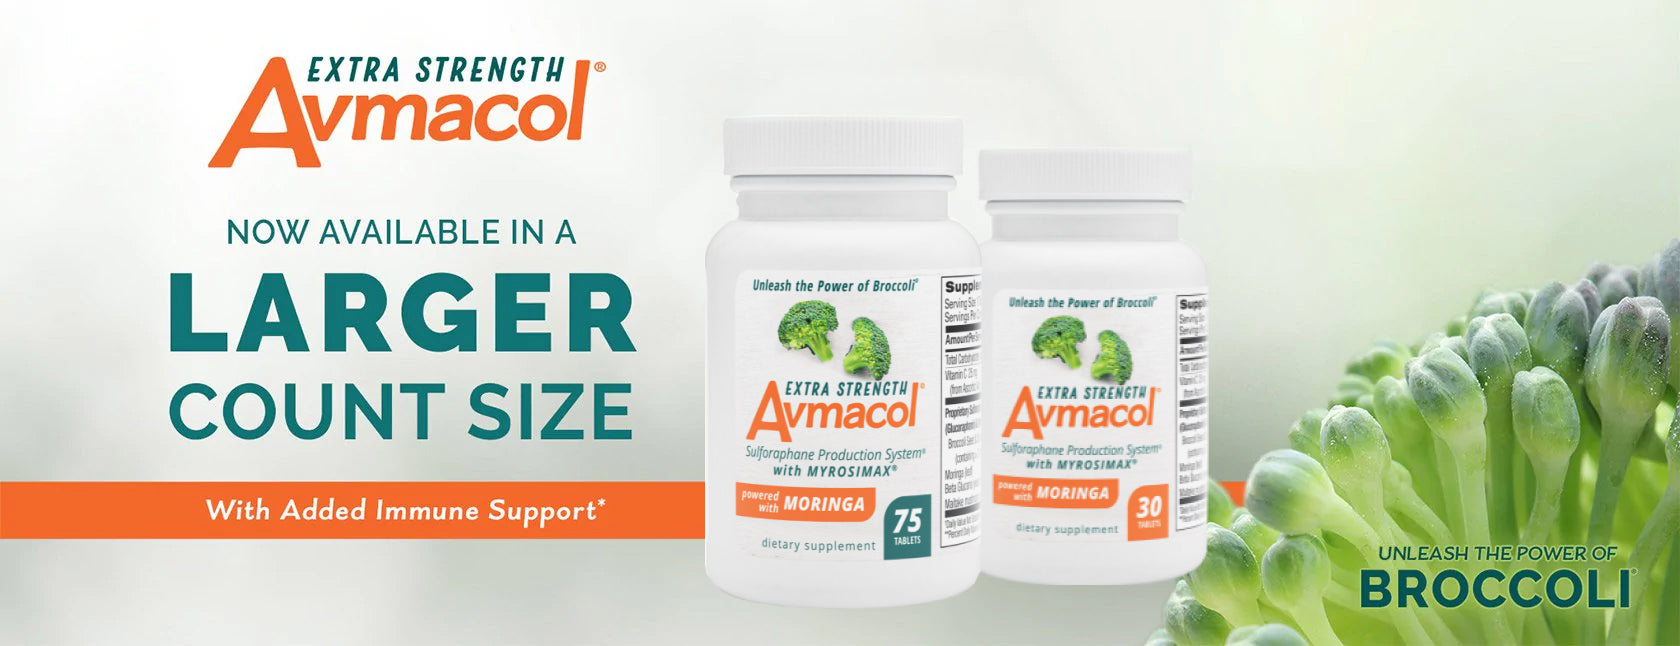 Avmacol Extra Strength now available in a larger count size, and with added Immune Support.